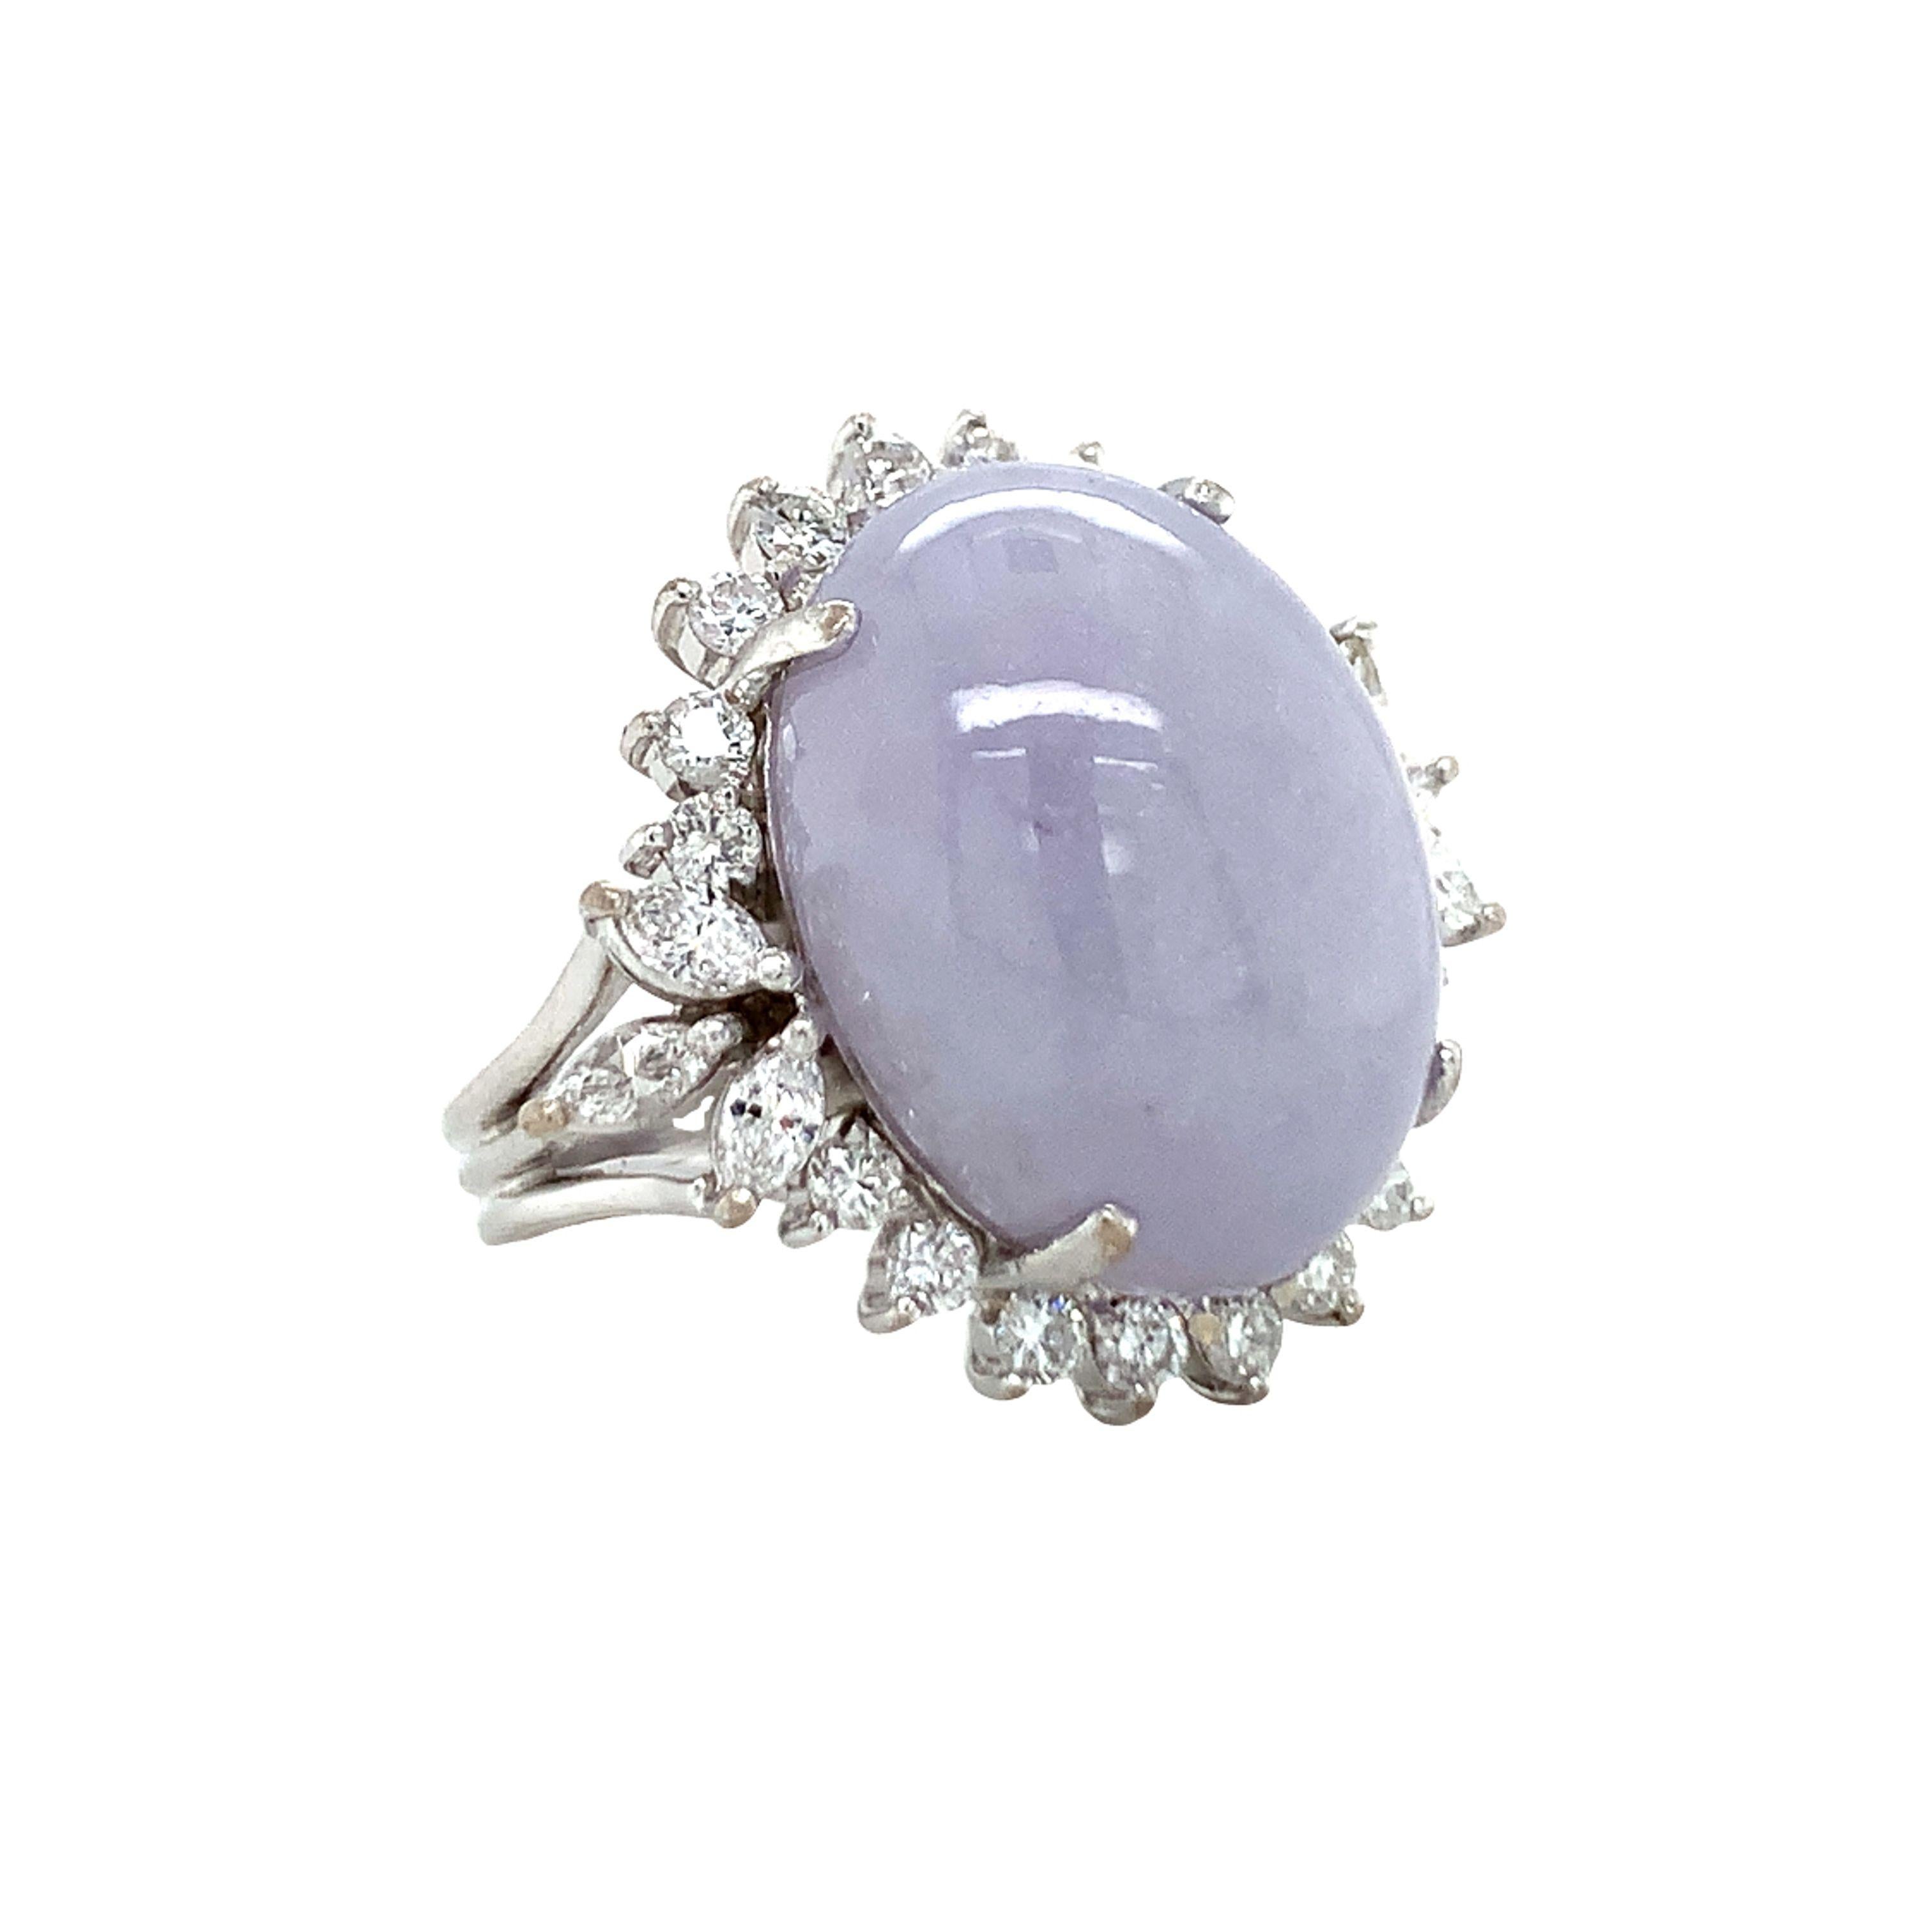 One mid-century lavender jade and diamond ring in 18k white gold centering one oval cabochon jade weighing 18 ct. (measures 19 x 15 x 7.5 millimeters) surrounded by 24 prong set, marquise and round brilliant cut diamonds weighing a total of 0.52 ct.